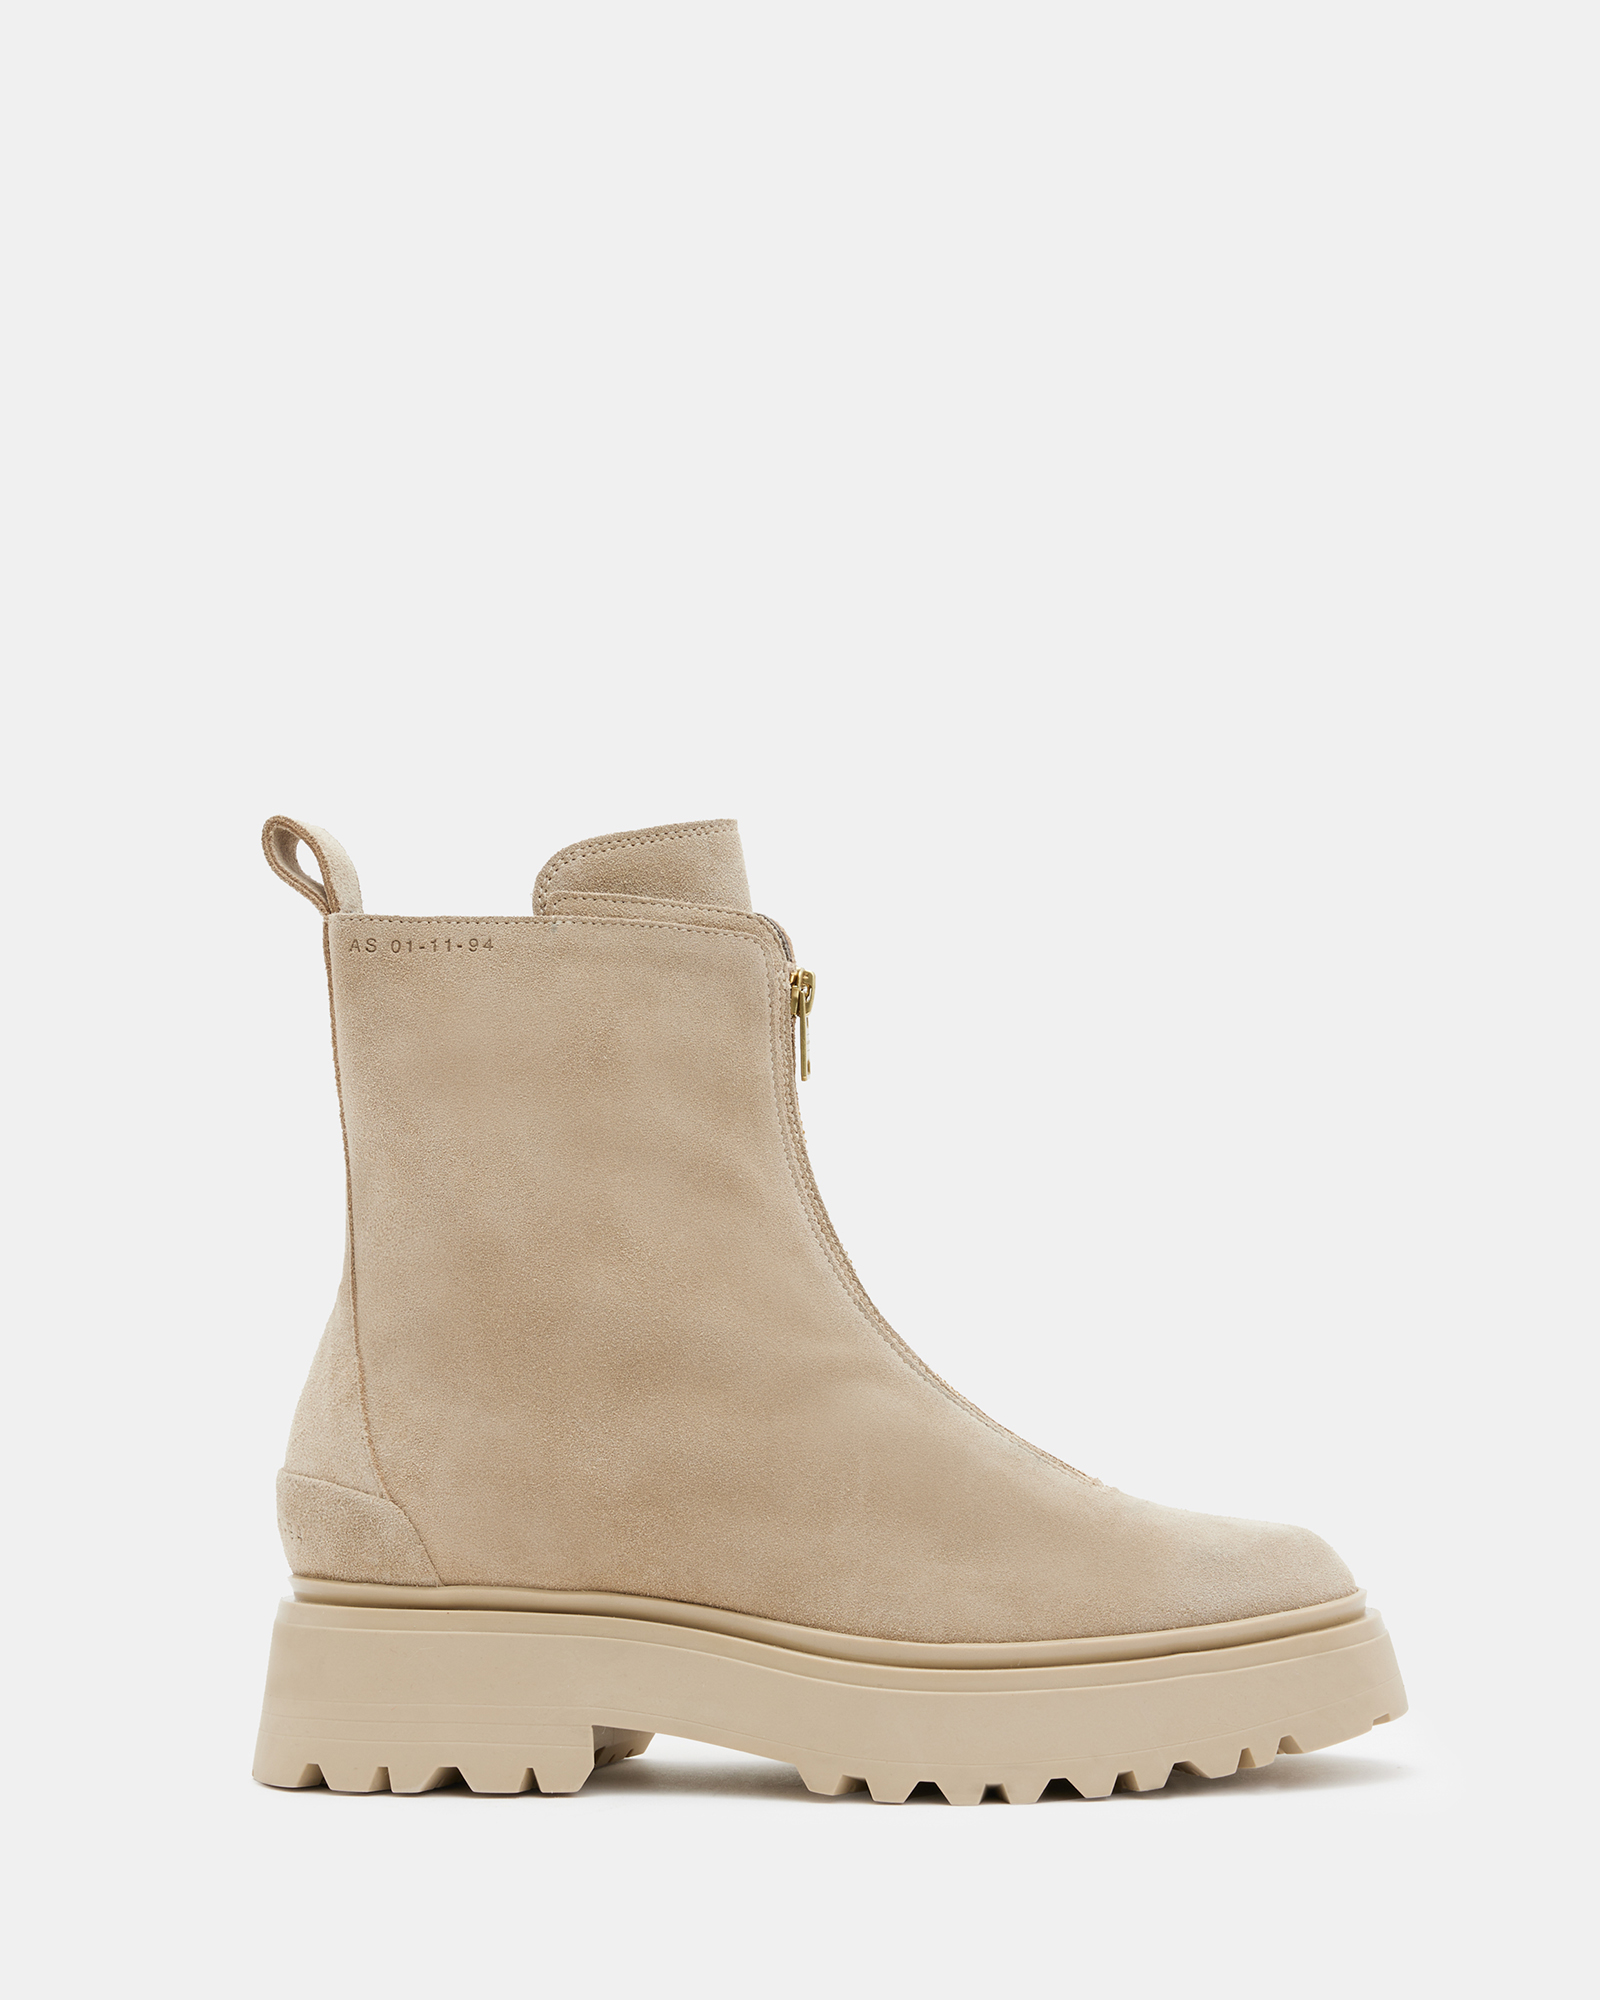 AllSaints Ophelia Chunky Suede Chelsea Boots,, SAND BROWN